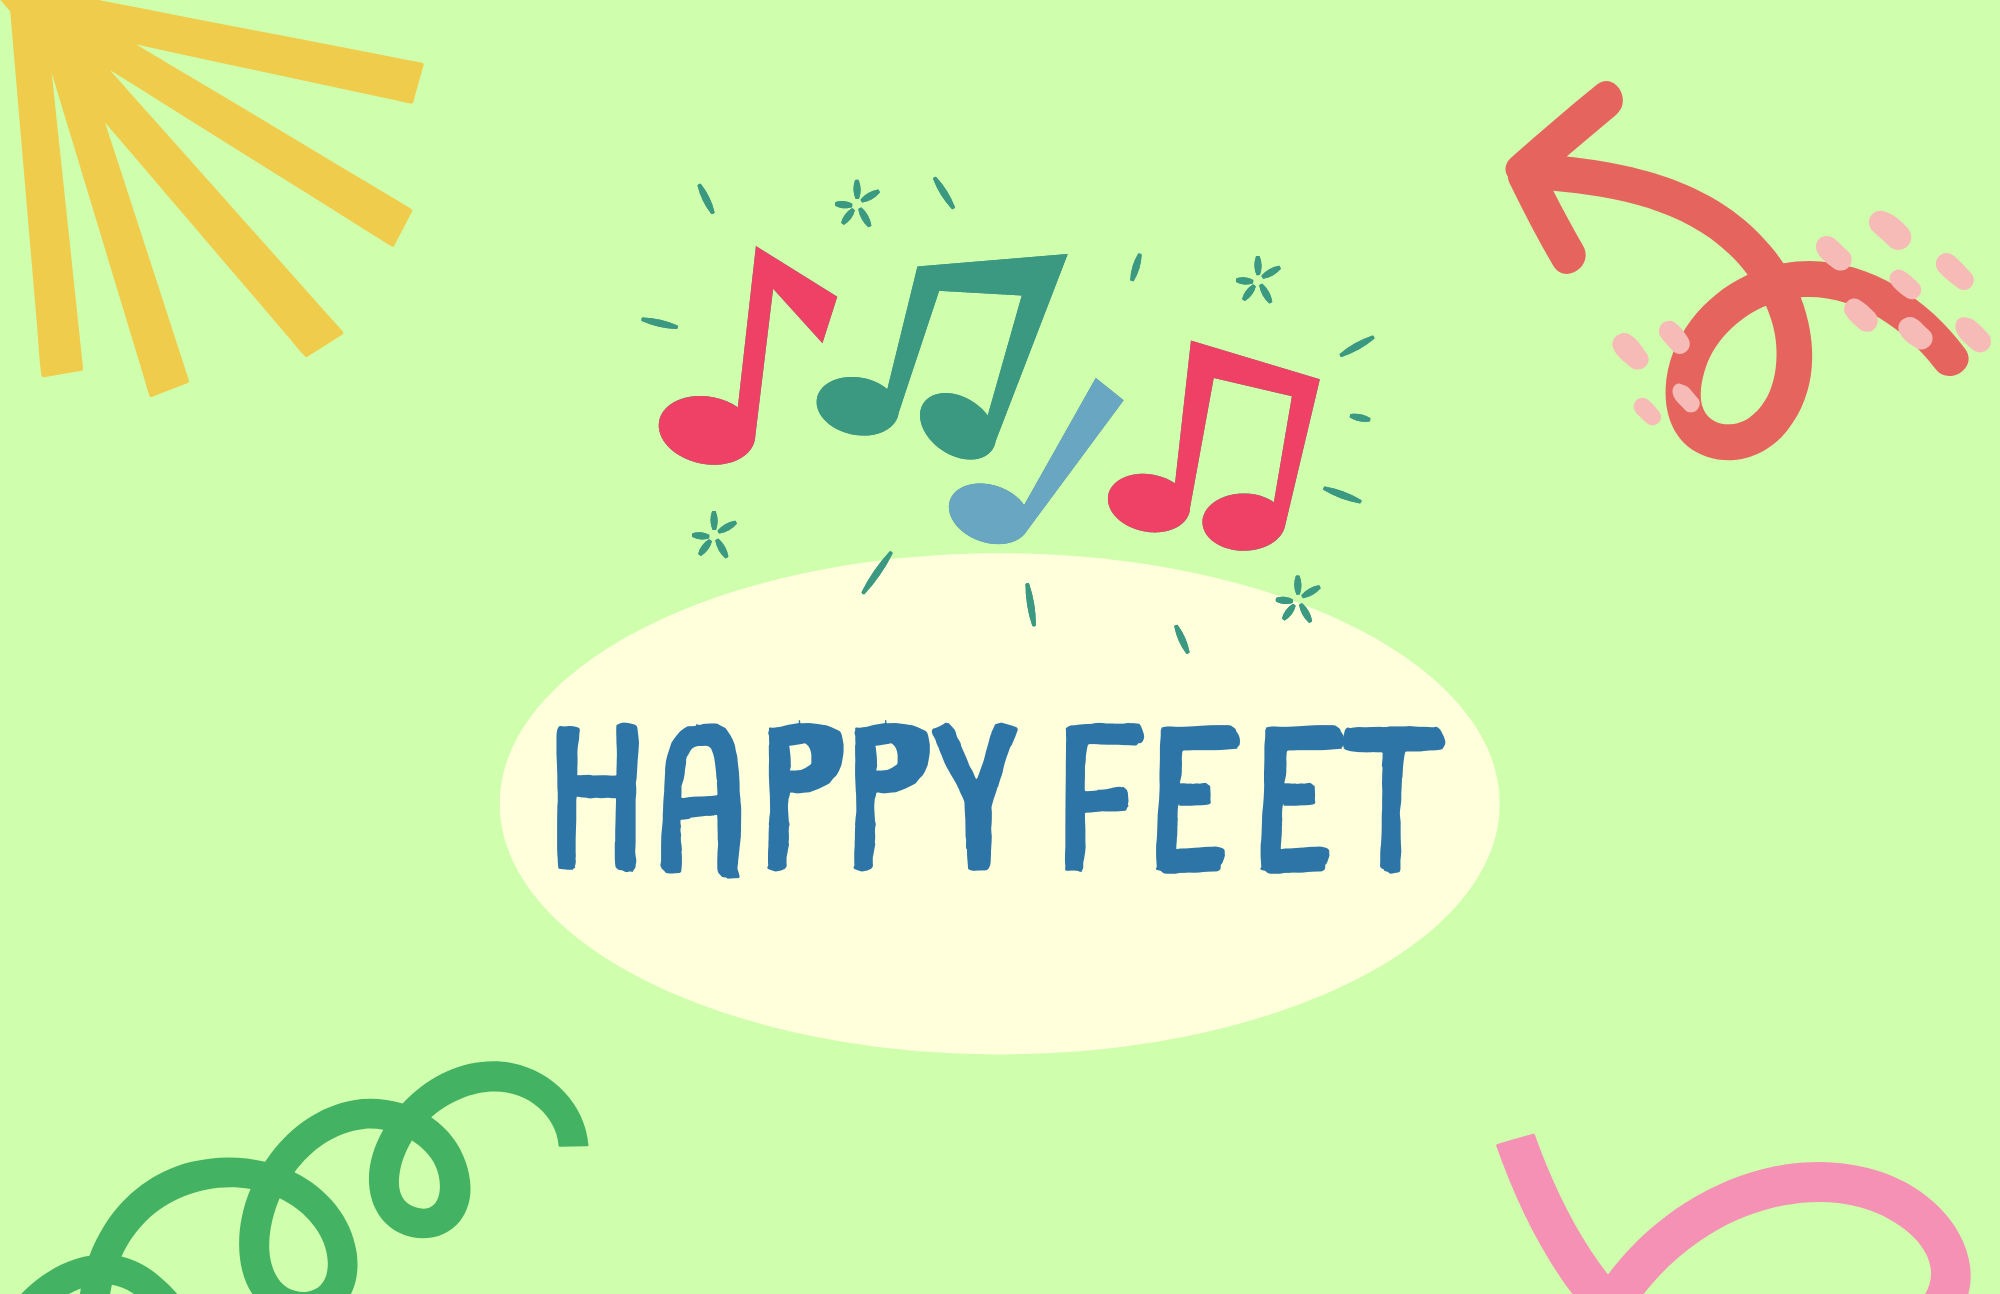 Happy feet text with music  notes